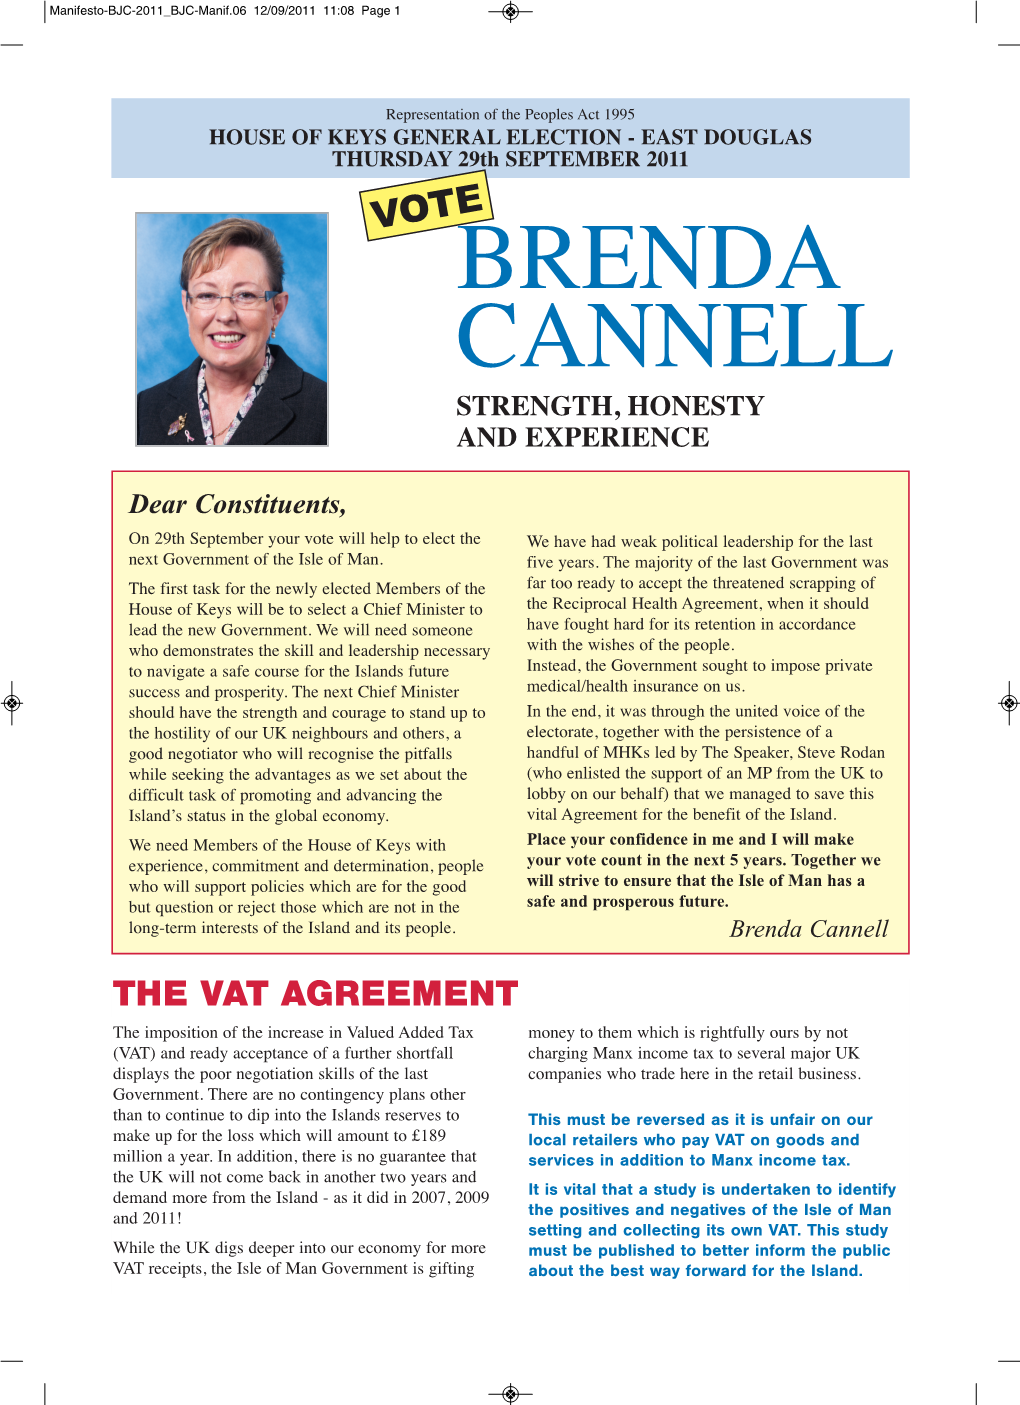 Brenda Cannell Strength, Honesty and Experience